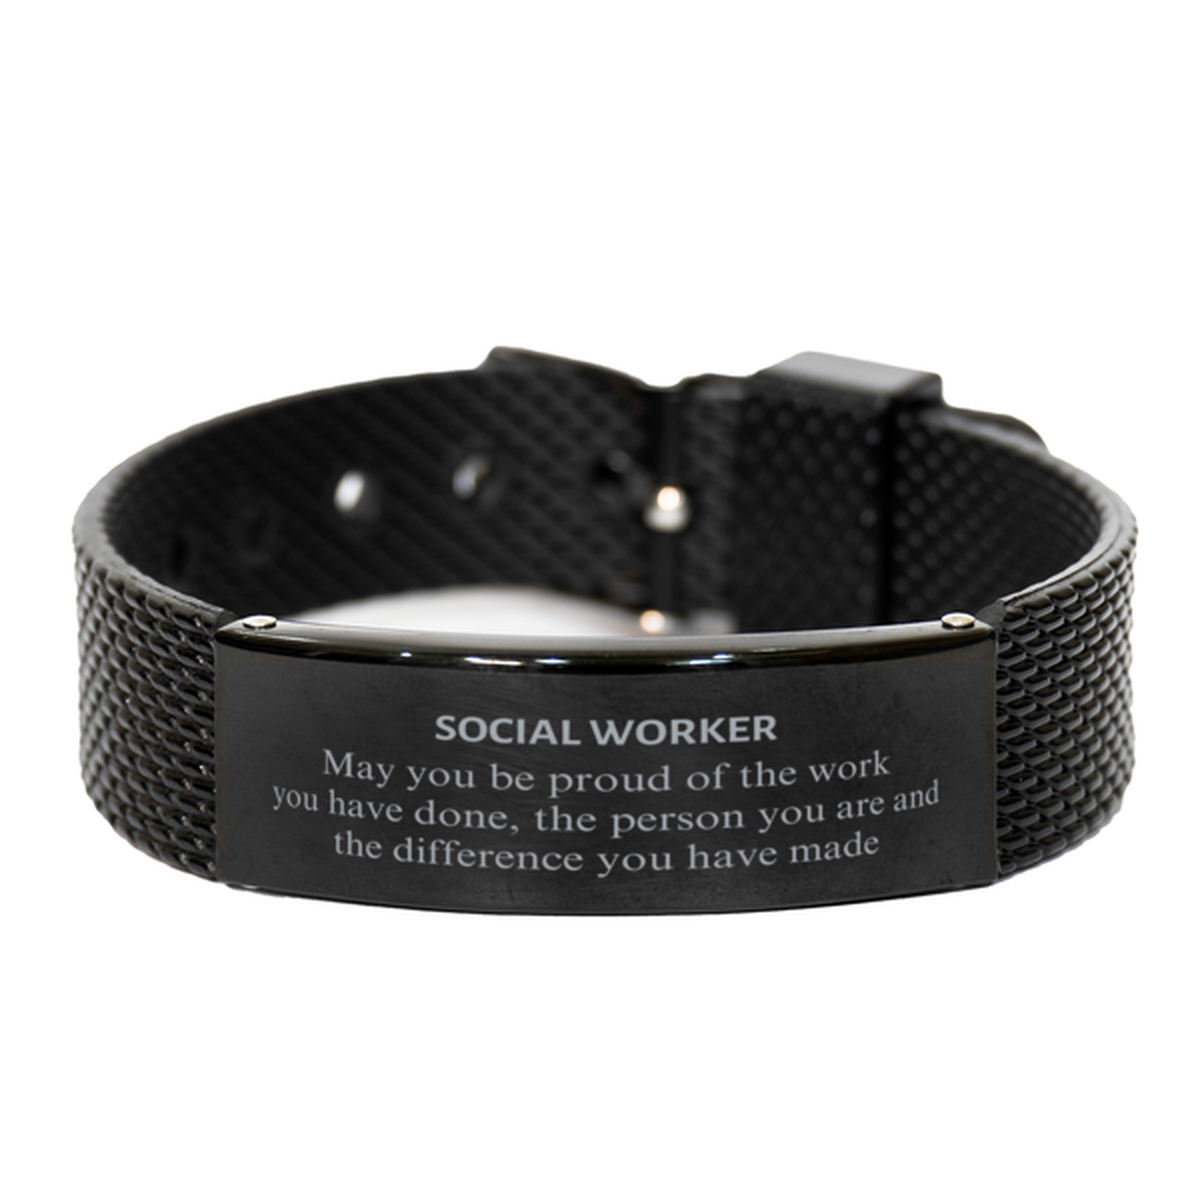 Social Worker May you be proud of the work you have done, Retirement Social Worker Black Shark Mesh Bracelet for Colleague Appreciation Gifts Amazing for Social Worker